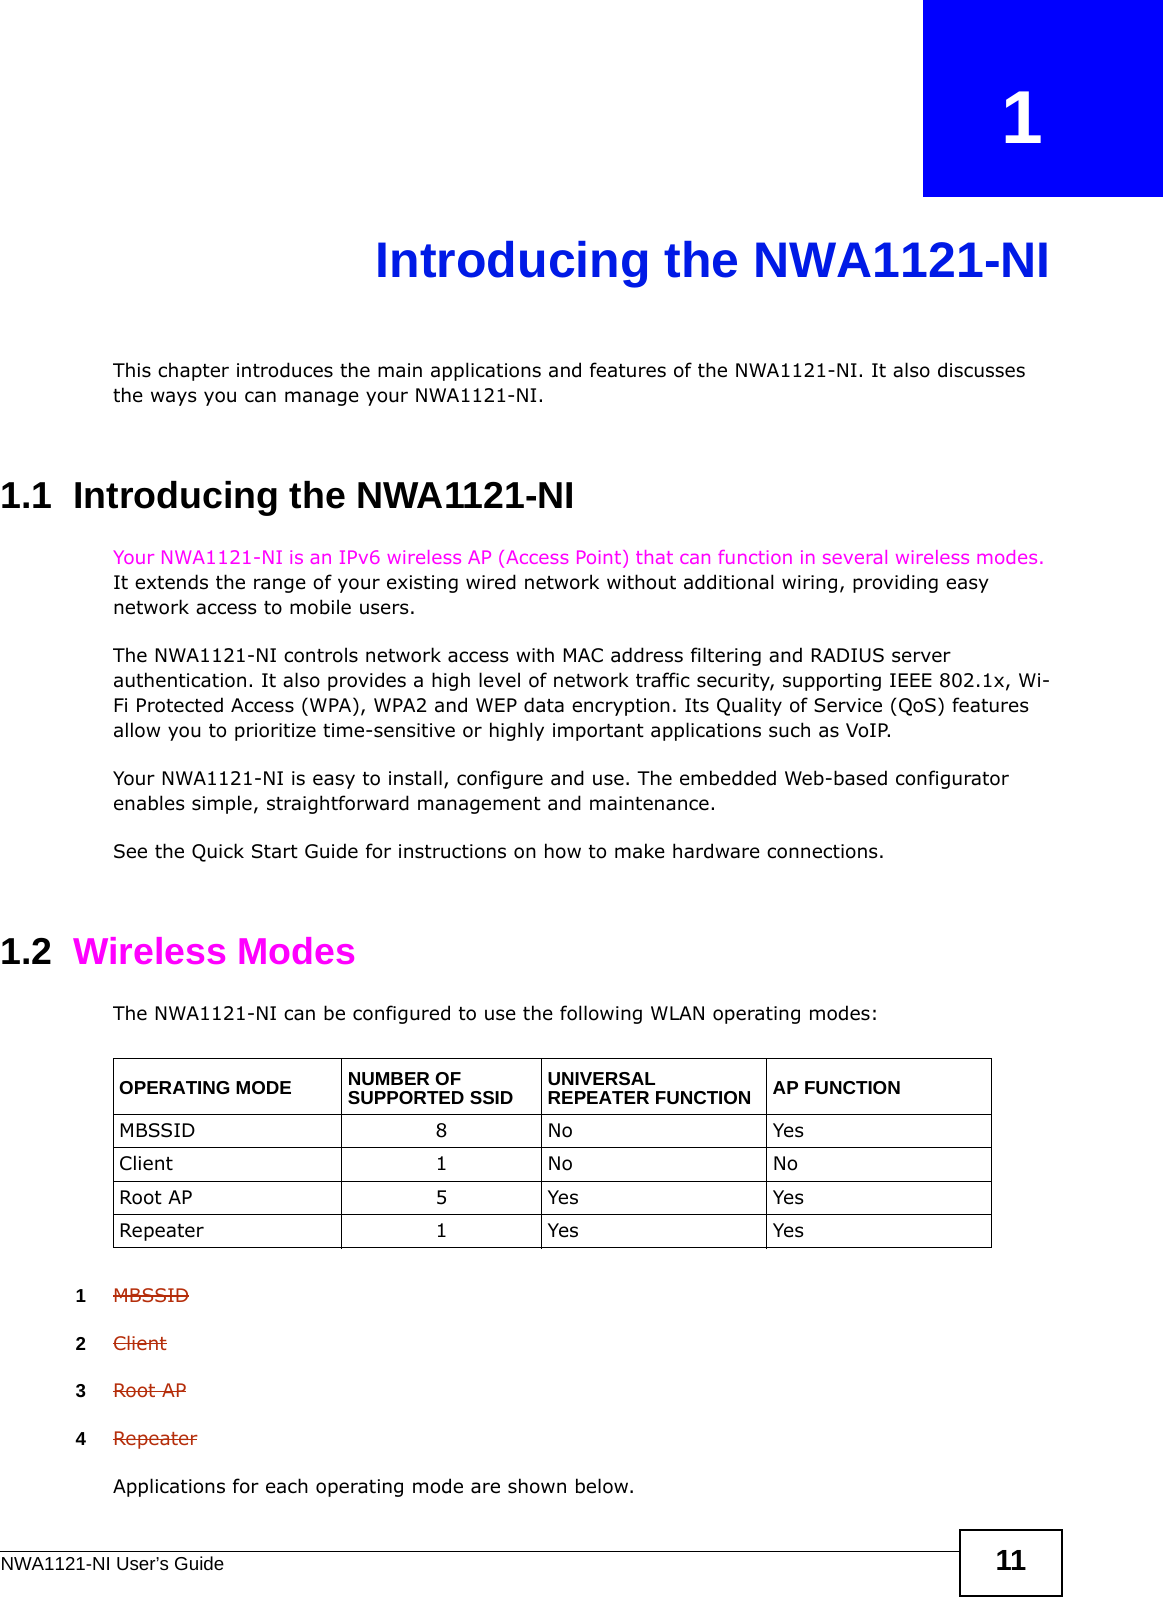 NWA1121-NI User’s Guide 11CHAPTER   1Introducing the NWA1121-NIThis chapter introduces the main applications and features of the NWA1121-NI. It also discusses the ways you can manage your NWA1121-NI.1.1  Introducing the NWA1121-NI Your NWA1121-NI is an IPv6 wireless AP (Access Point) that can function in several wireless modes. It extends the range of your existing wired network without additional wiring, providing easy network access to mobile users. The NWA1121-NI controls network access with MAC address filtering and RADIUS server authentication. It also provides a high level of network traffic security, supporting IEEE 802.1x, Wi-Fi Protected Access (WPA), WPA2 and WEP data encryption. Its Quality of Service (QoS) features allow you to prioritize time-sensitive or highly important applications such as VoIP.Your NWA1121-NI is easy to install, configure and use. The embedded Web-based configurator enables simple, straightforward management and maintenance.See the Quick Start Guide for instructions on how to make hardware connections.1.2  Wireless ModesThe NWA1121-NI can be configured to use the following WLAN operating modes:1MBSSID2Client3Root AP4RepeaterApplications for each operating mode are shown below.OPERATING MODE NUMBER OF SUPPORTED SSID UNIVERSAL REPEATER FUNCTION AP FUNCTIONMBSSID 8 No YesClient 1 No NoRoot AP 5 Yes YesRepeater 1 Yes Yes